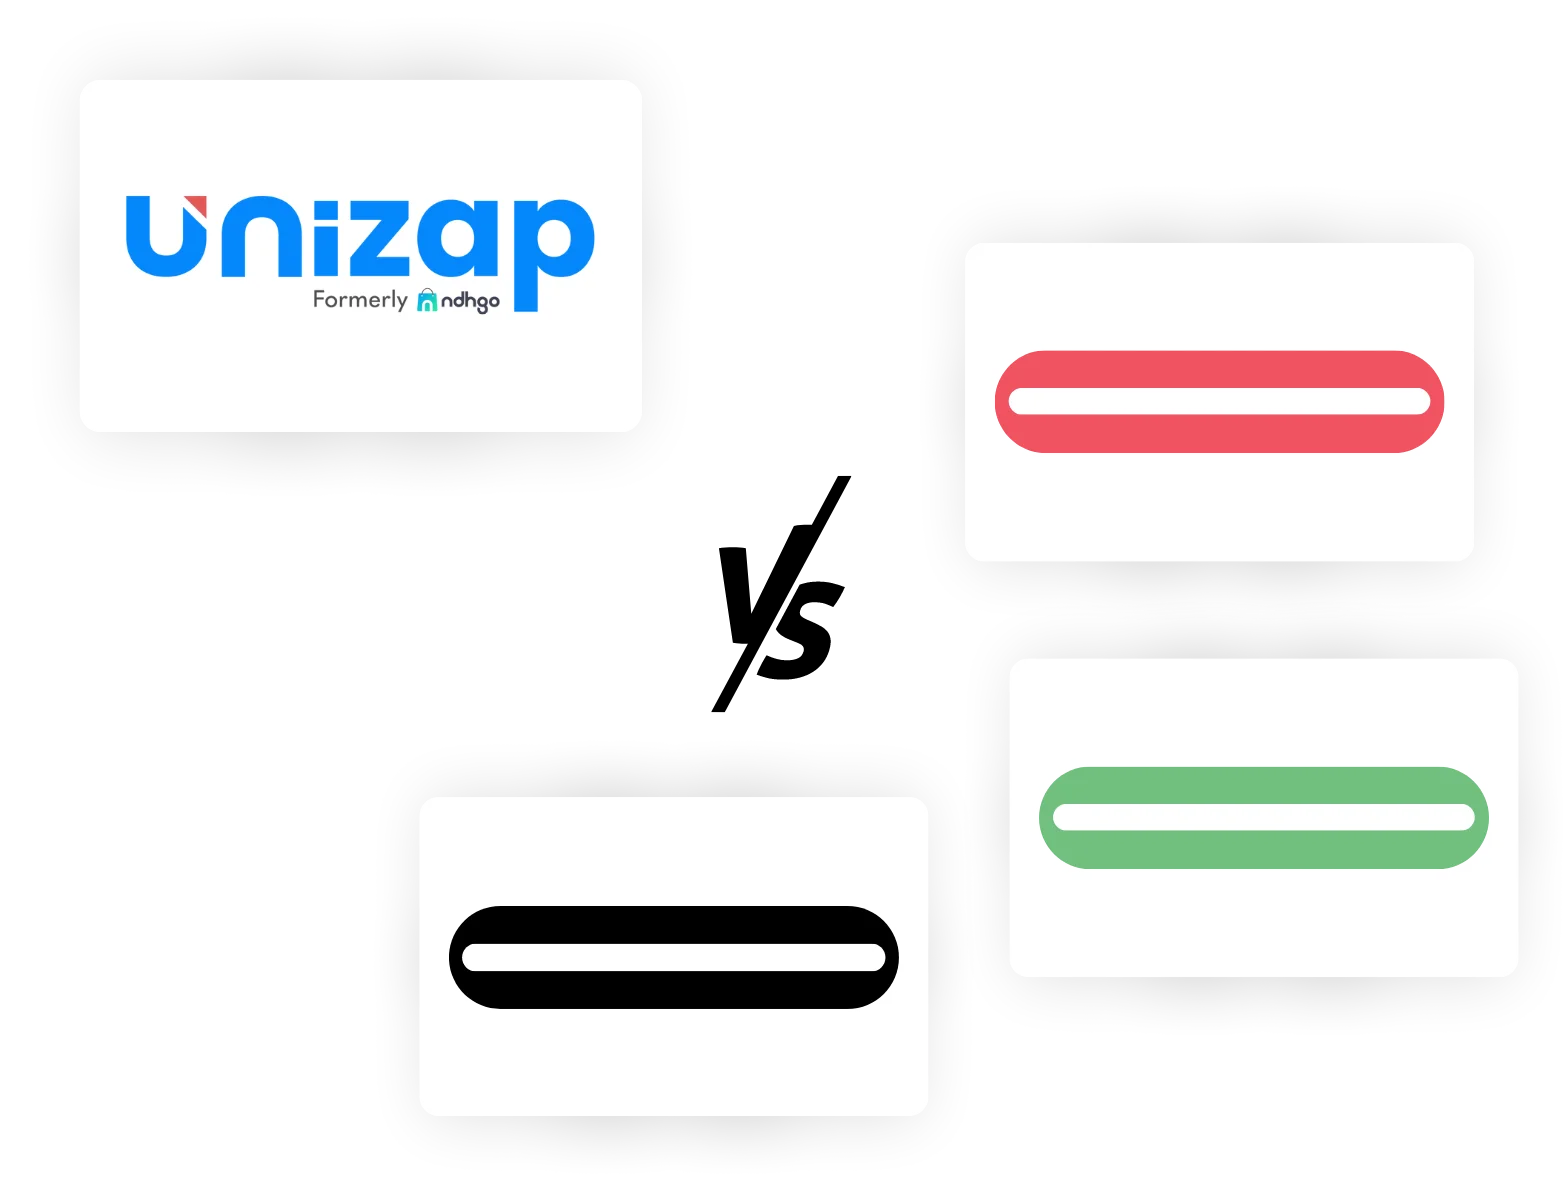 Compare unizap and choose best ecommerce platforms in India